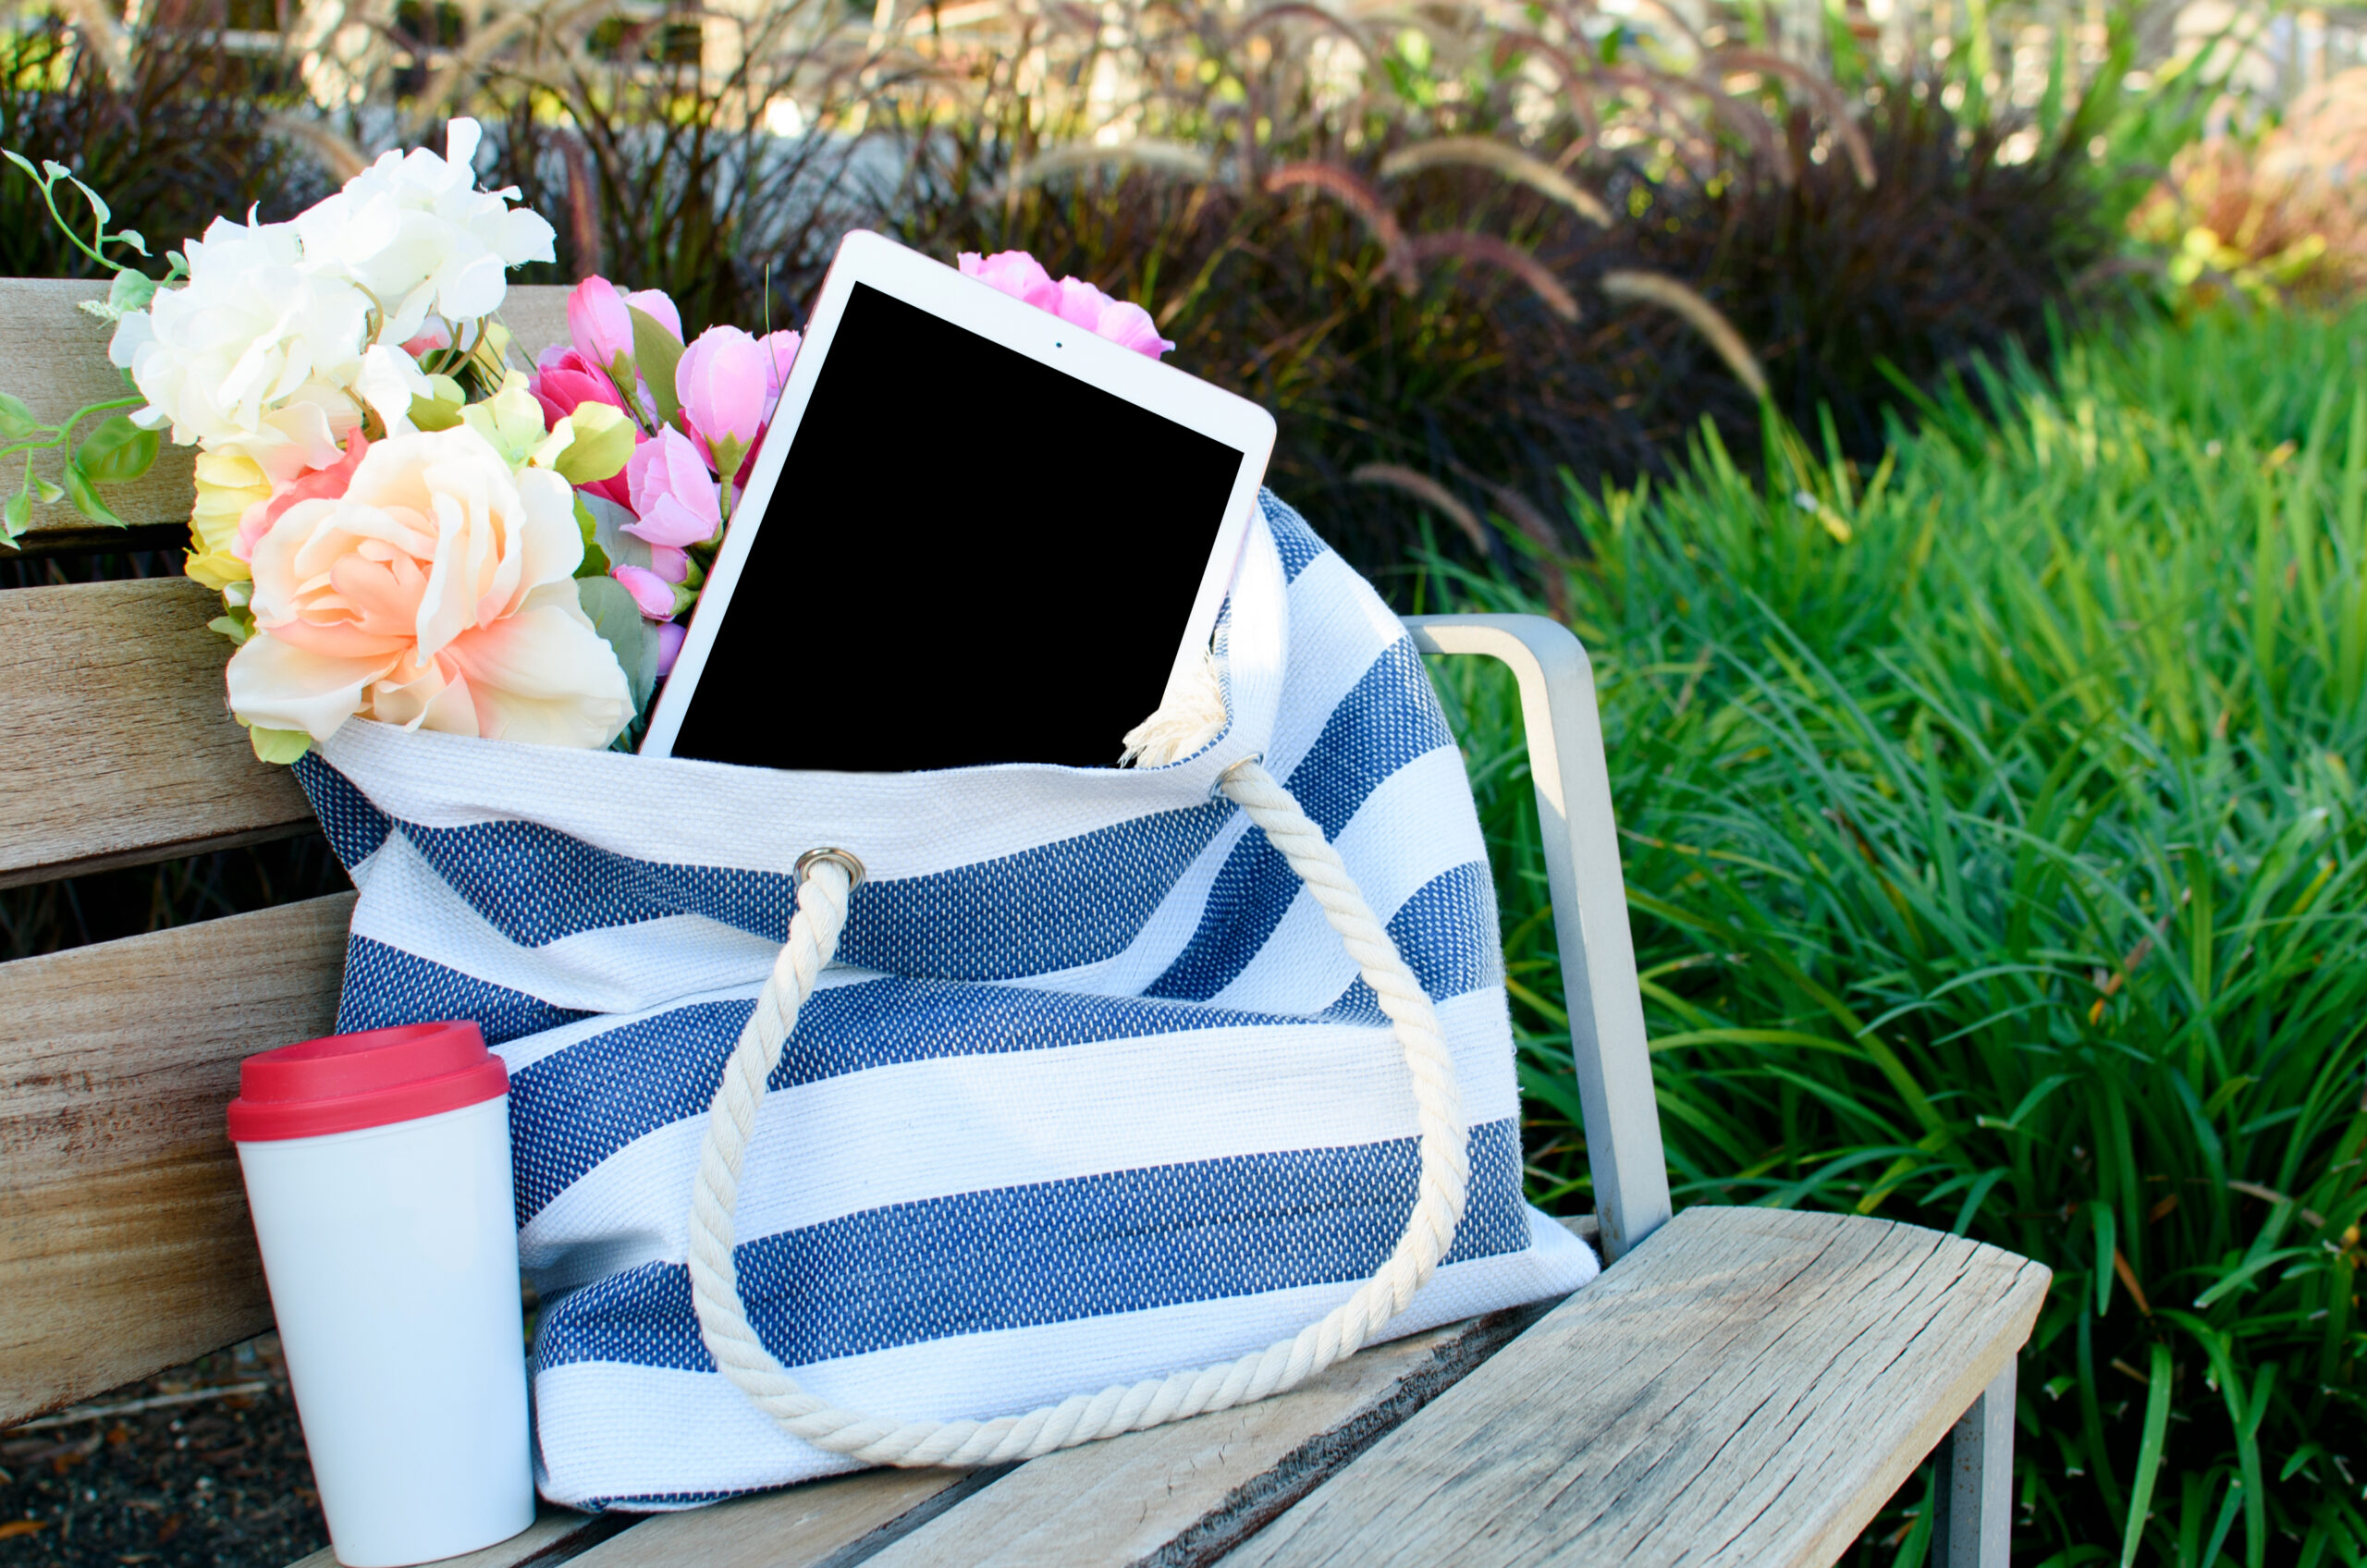 White ipad with black screen in tote bag